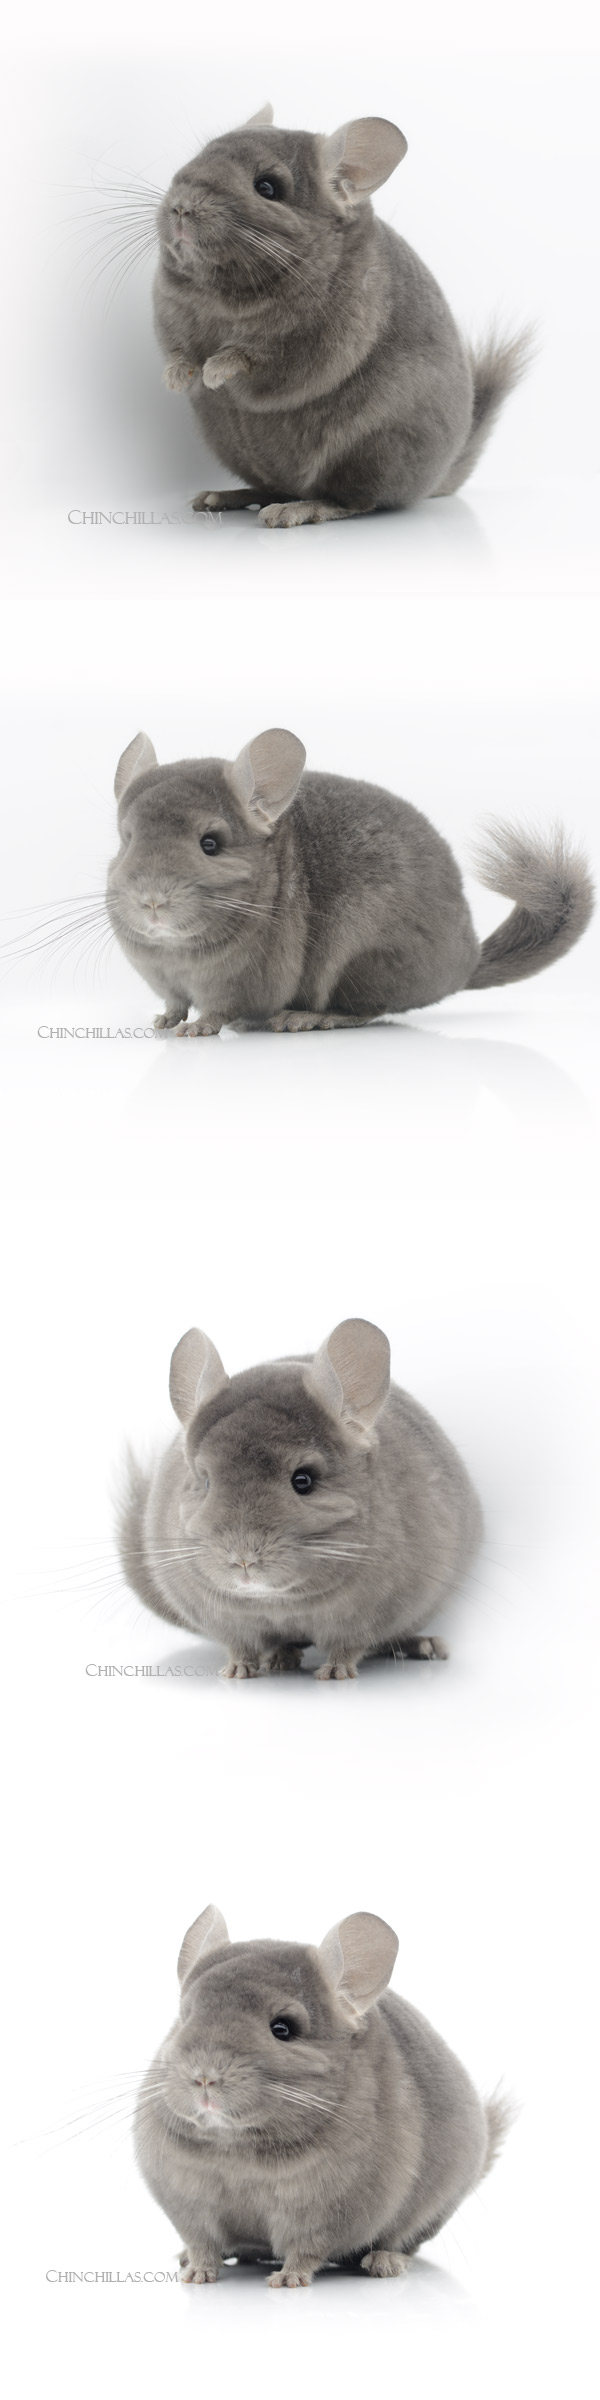 Chinchilla or related item offered for sale or export on Chinchillas.com - 23059 Show Quality Wrap-Around Violet Female Chinchilla